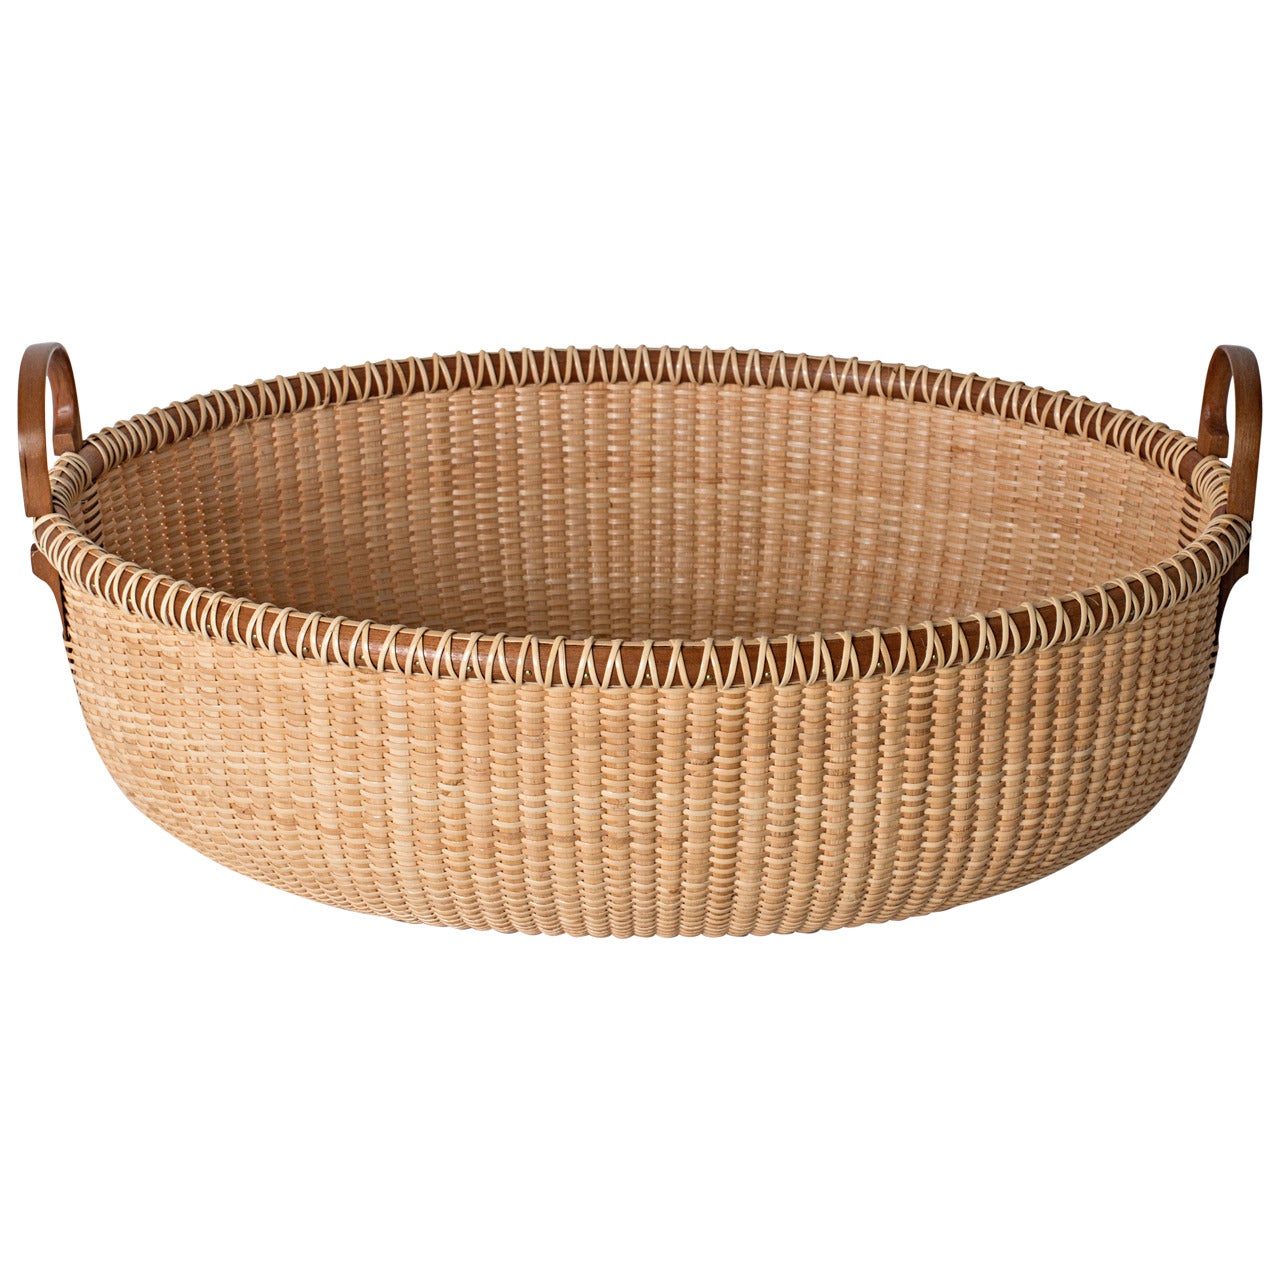 Nantucket Lightship Basket Serving Tray by Lucille LaRochelle